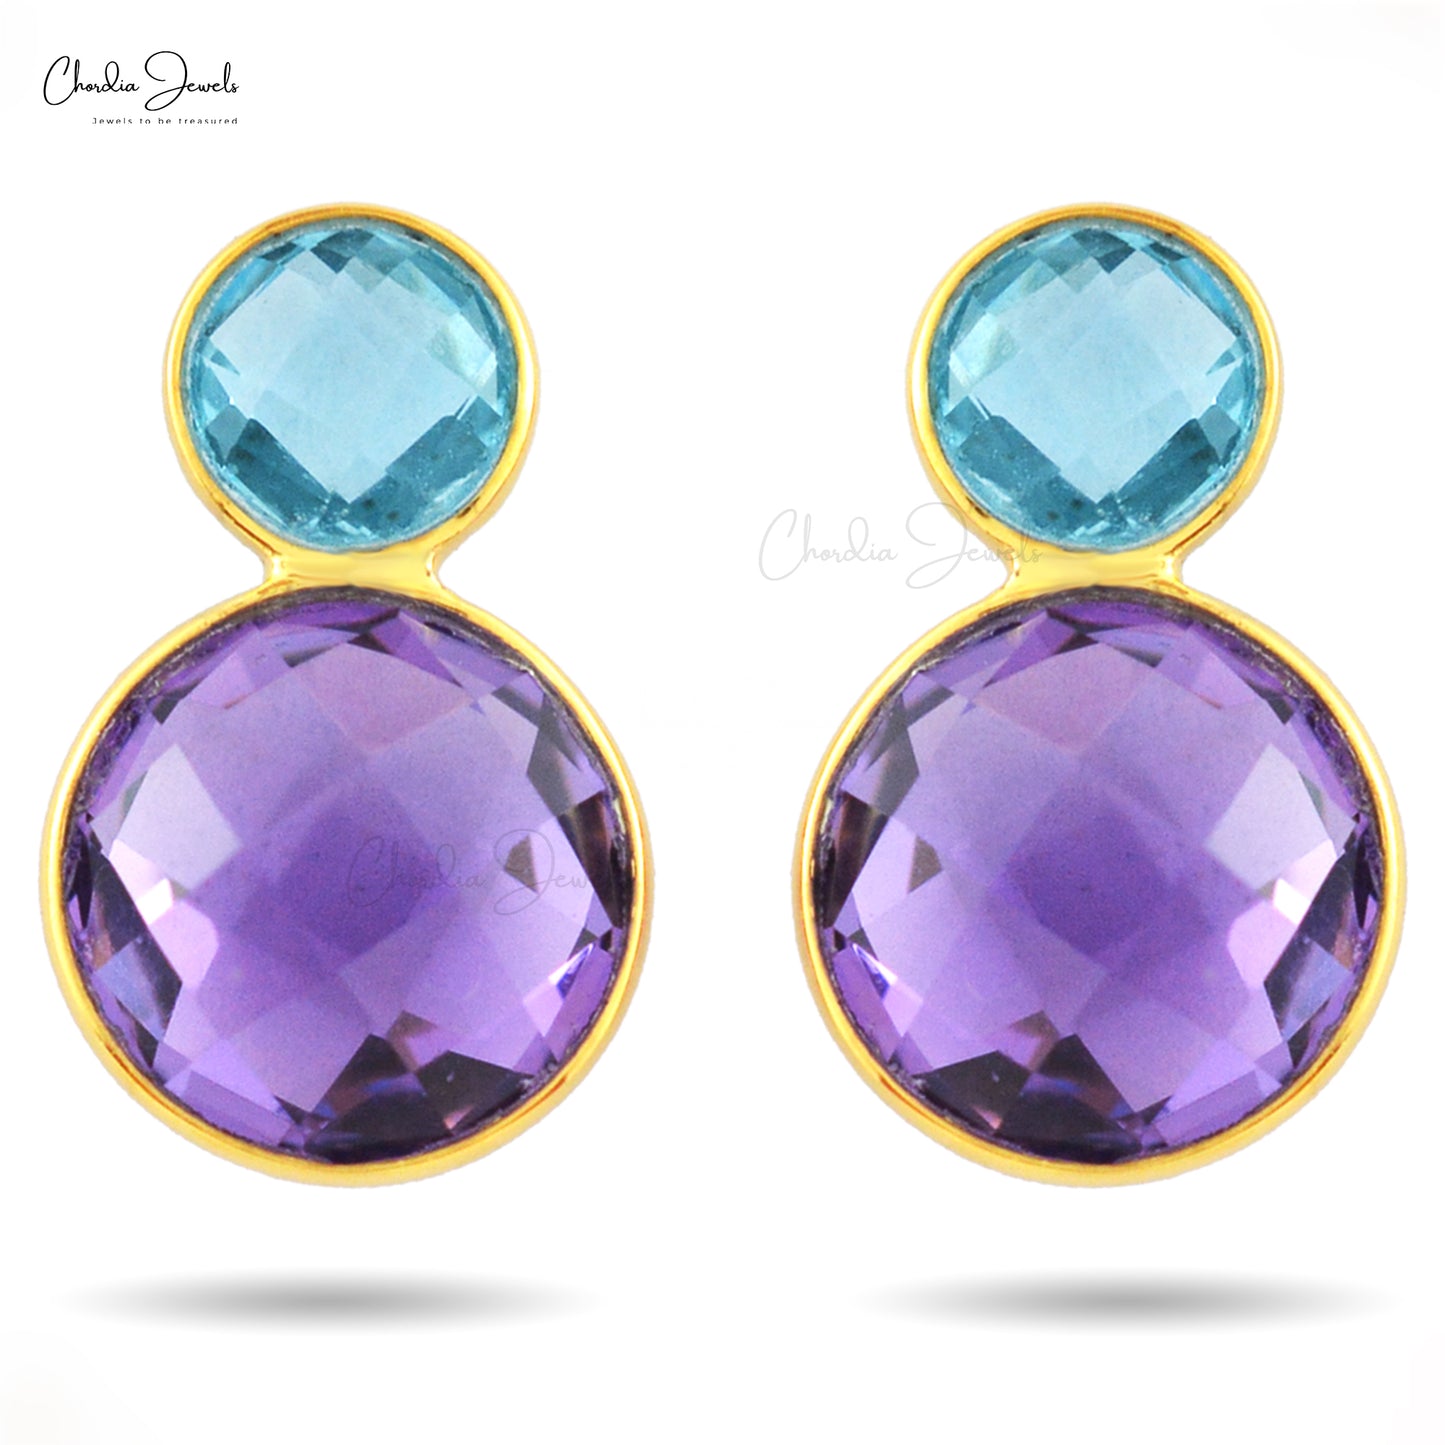 Dual Round Checker Cut 925 Sterling Silver Earrings With Amethyst & Swiss Blue Topaz Gemstone Studs From Trusted Supplier At Offer Price